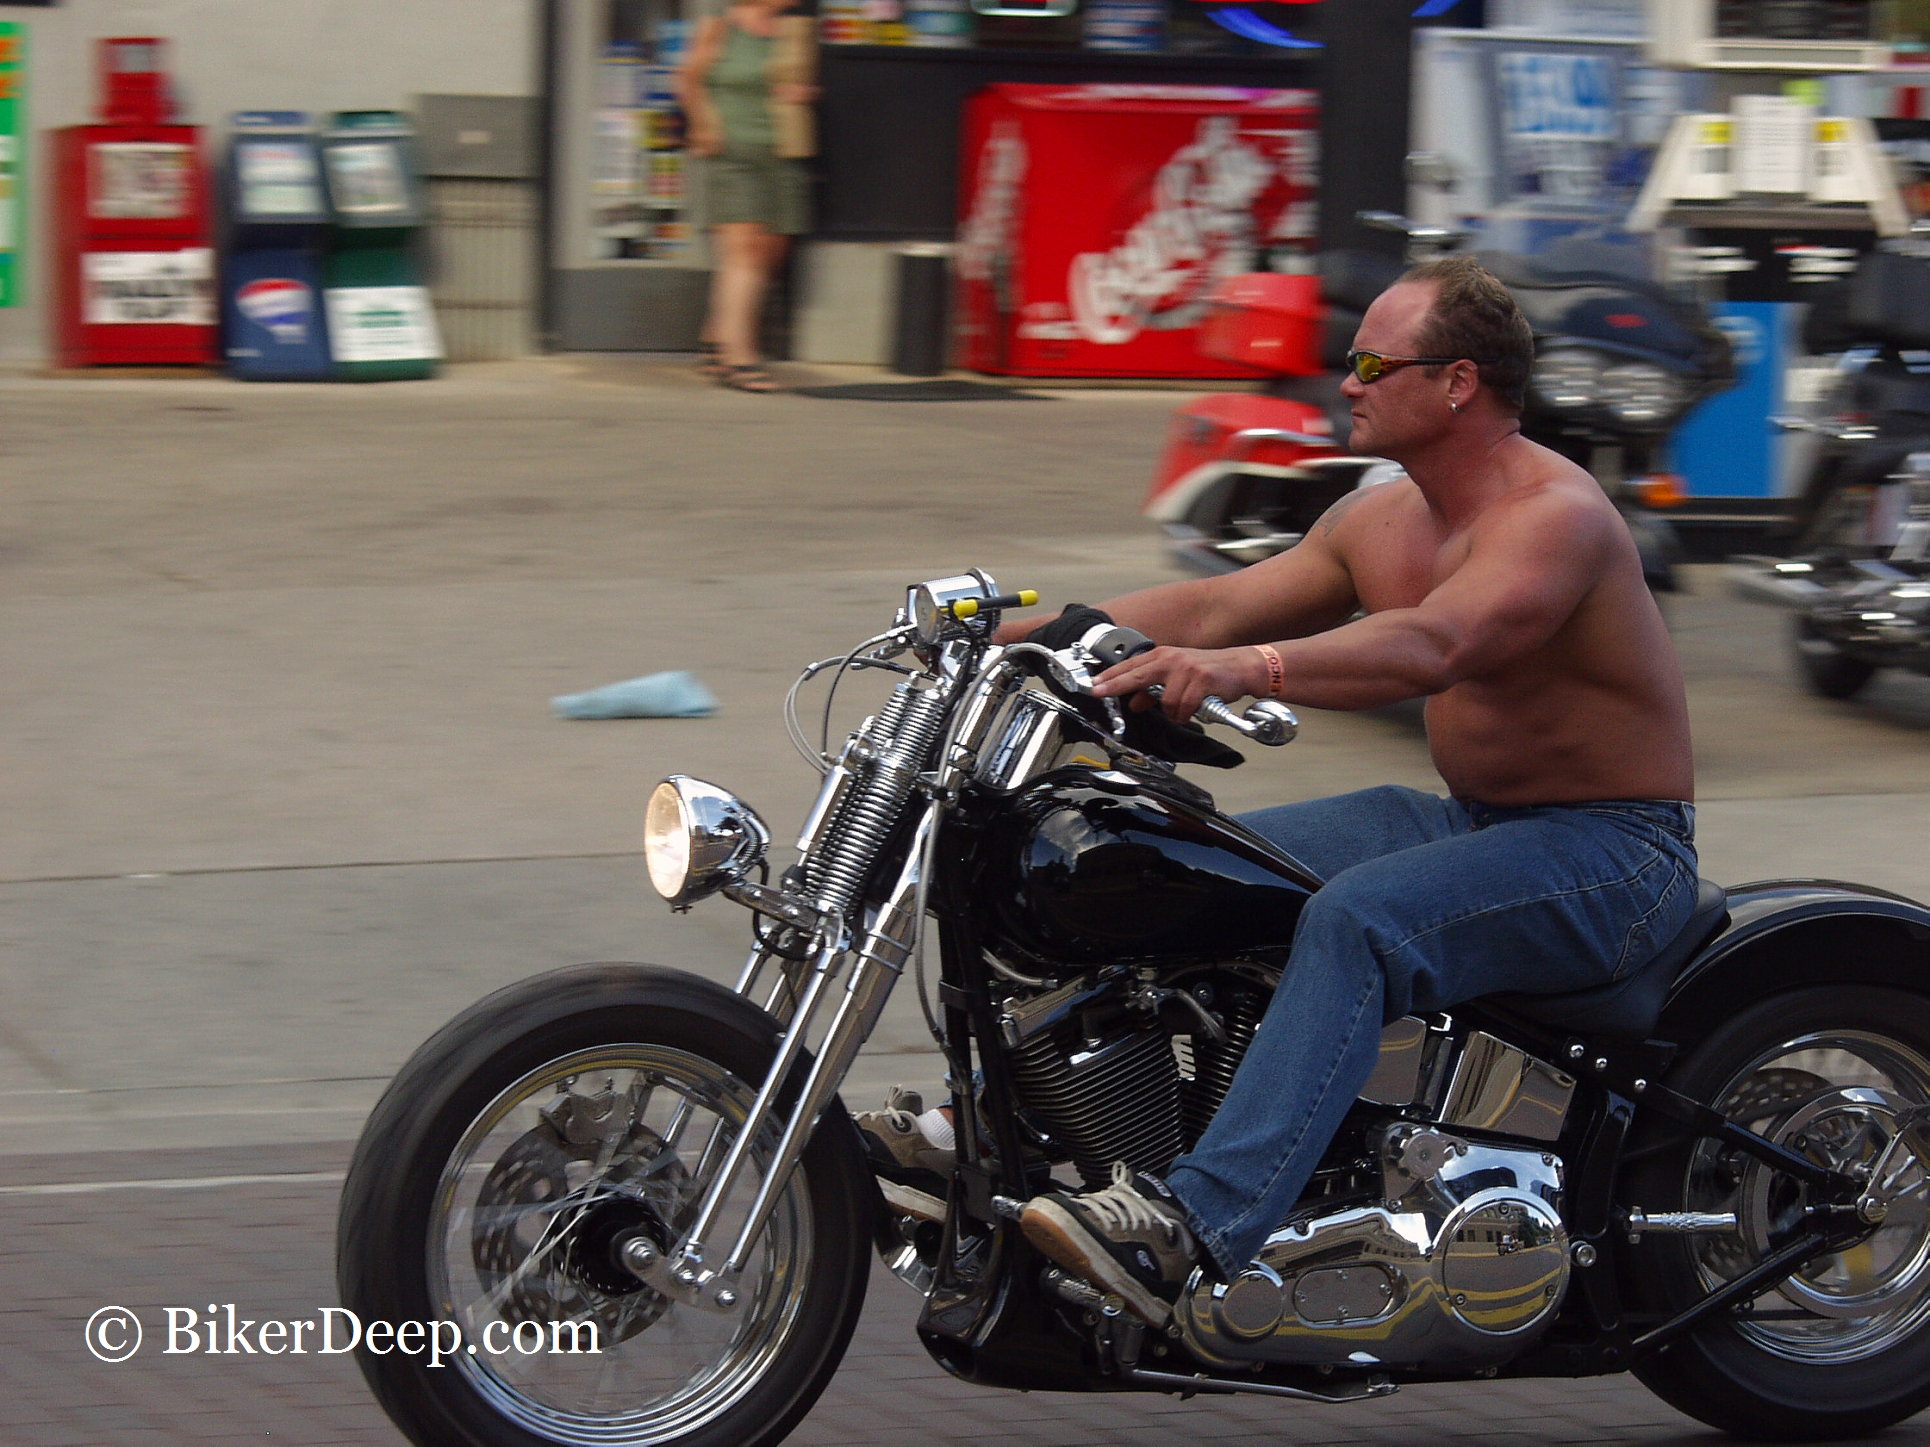 bared back motorcyclist